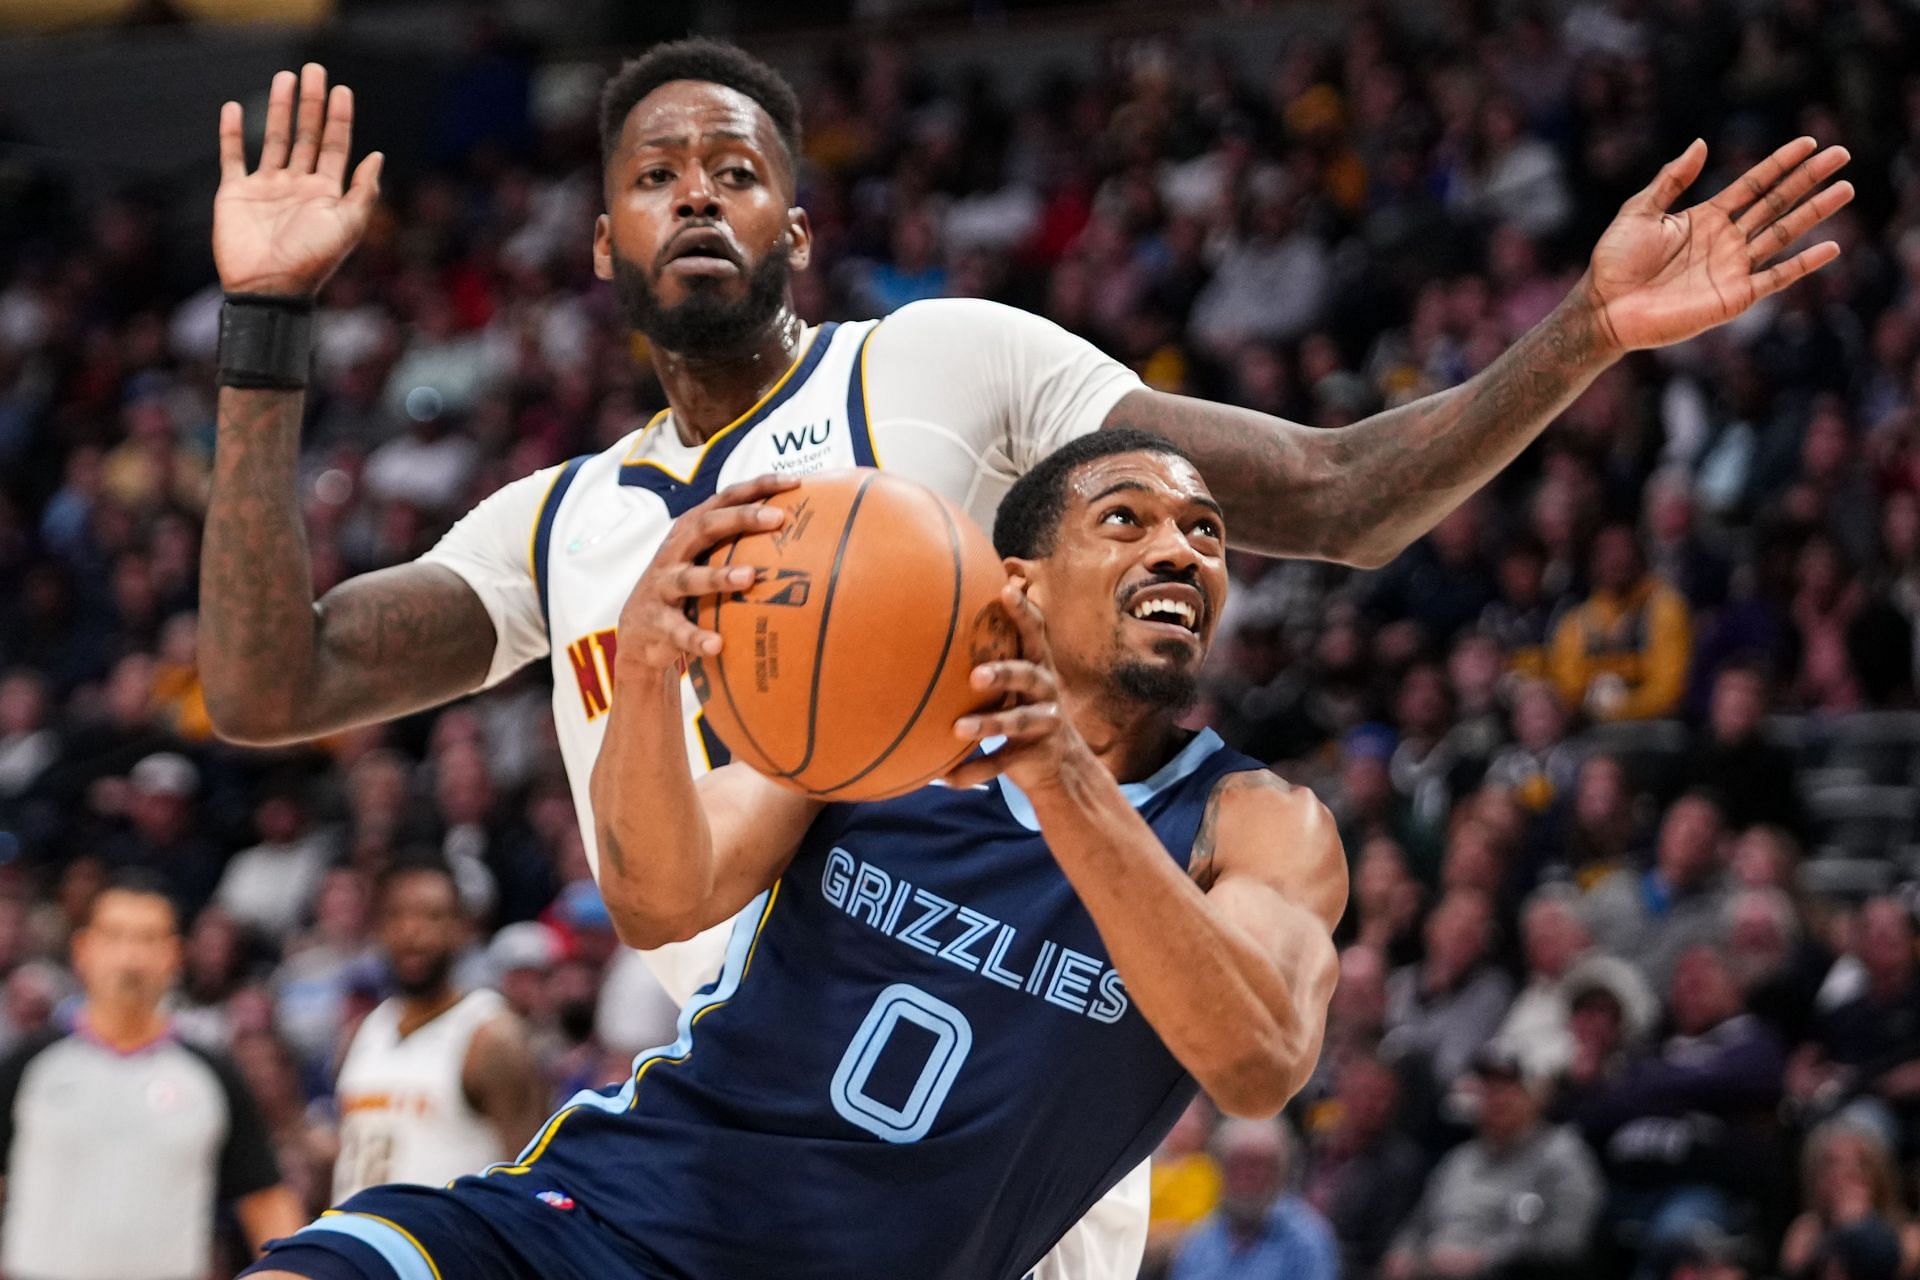 The Memphis Grizzlies will host the Minnesota Timberwolves in Game 2 of Round 1 of the NBA Playoffs